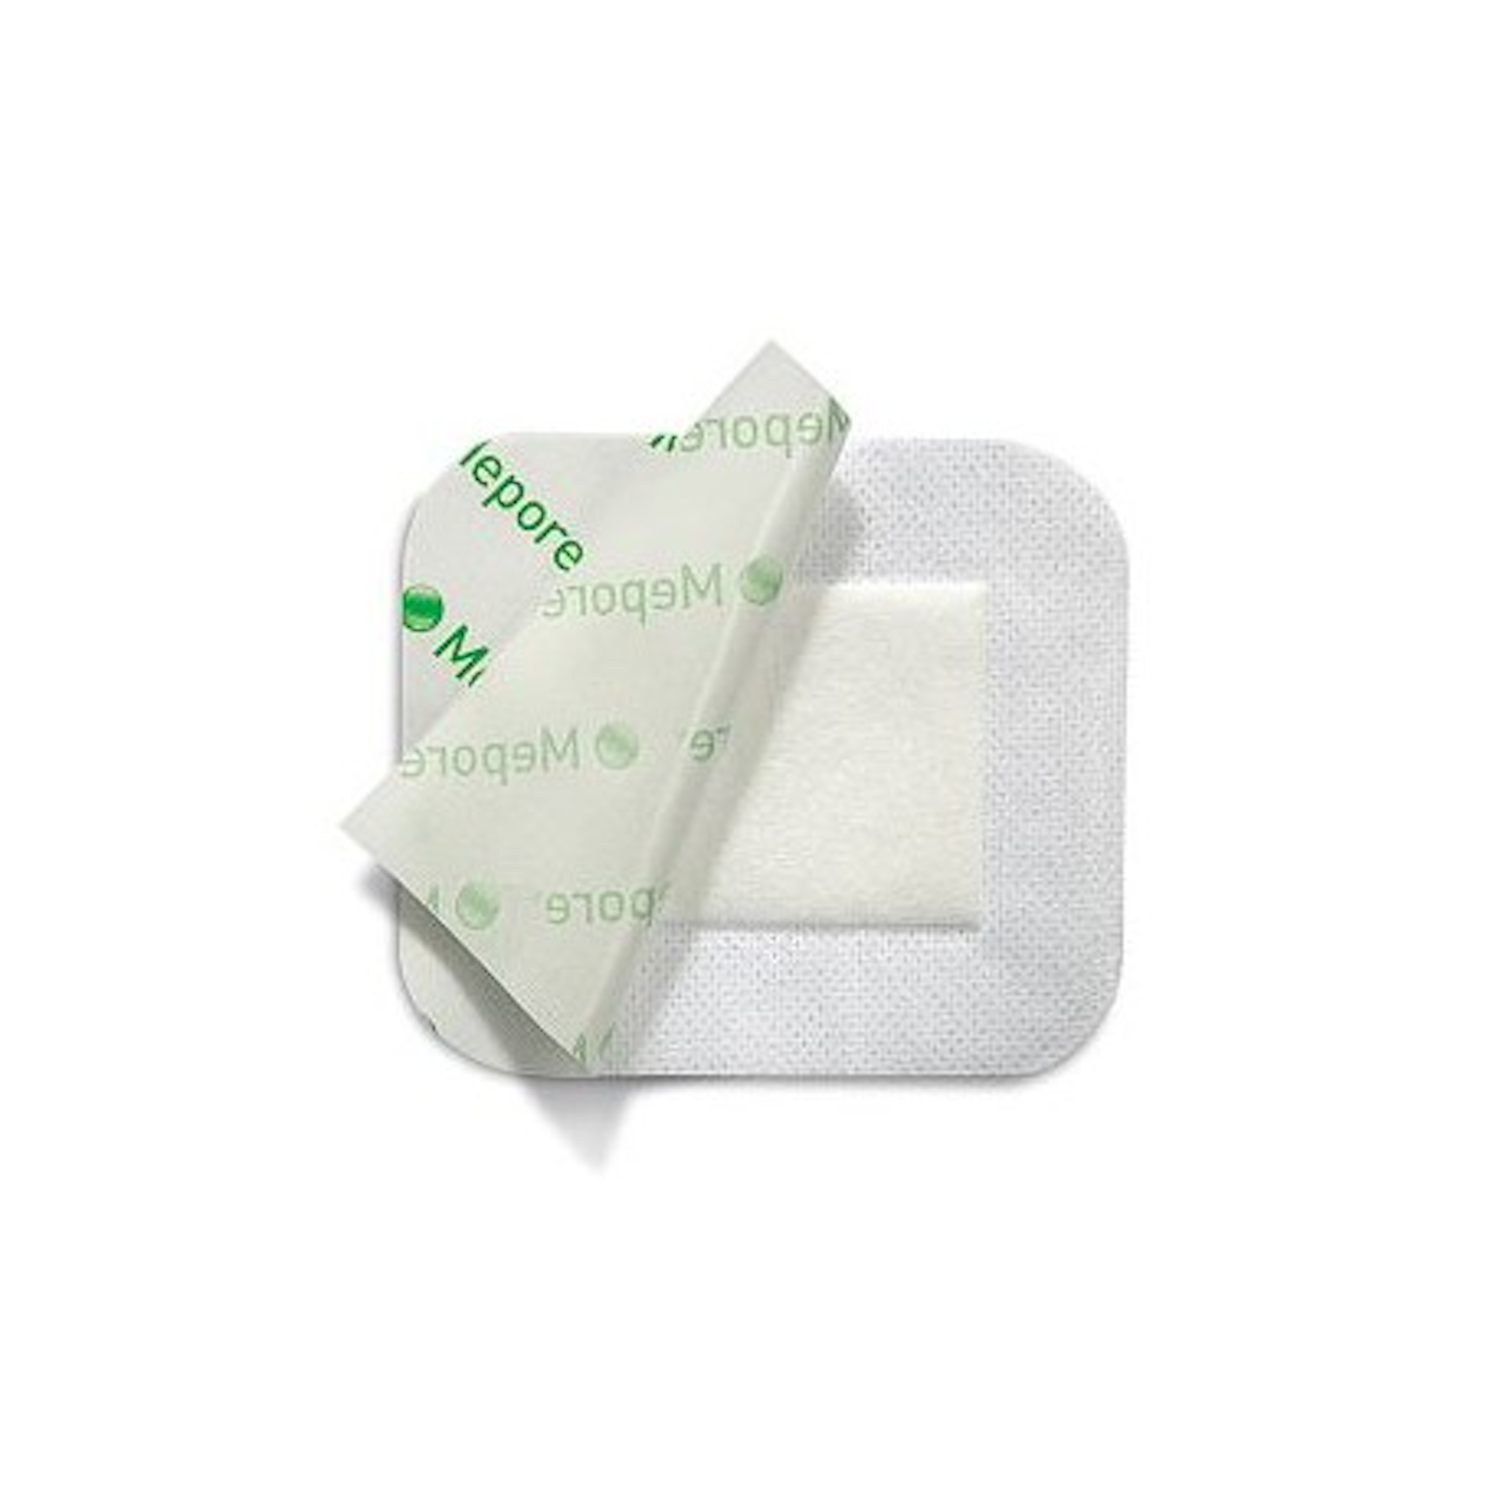 Mepore Low Exudate Dressing | 9 x 15cm | Pack of 50 (1)